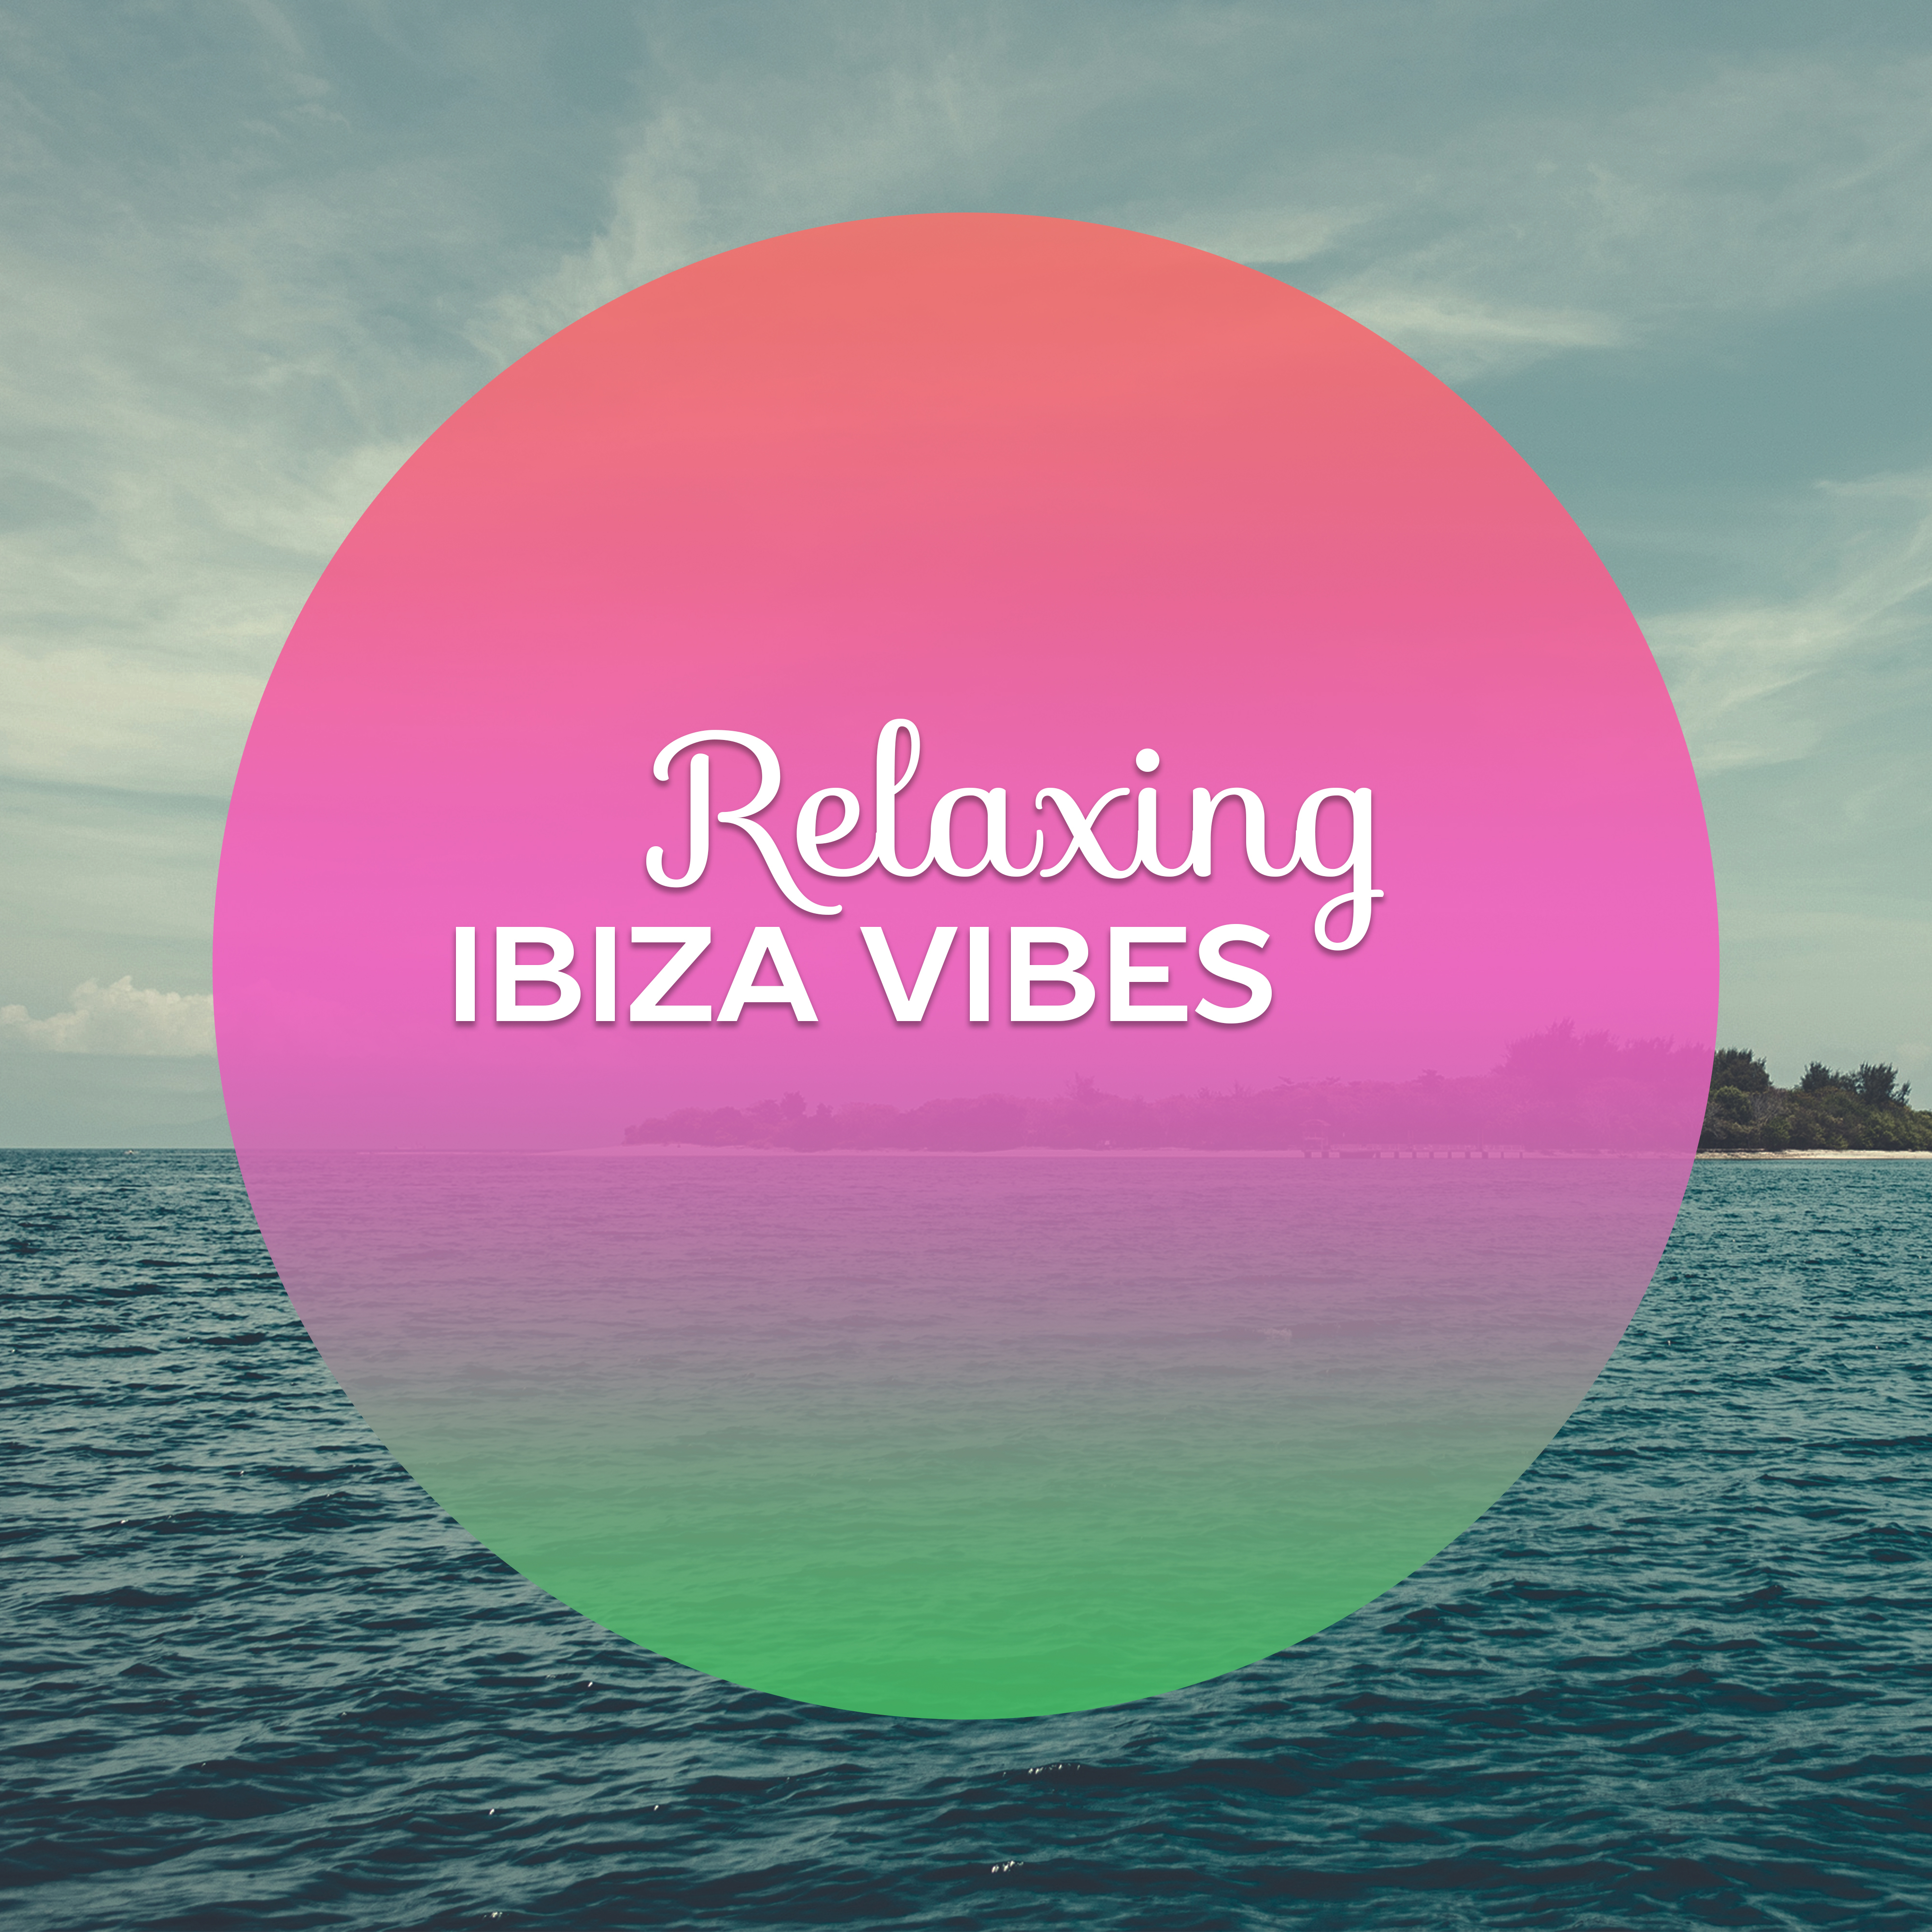 Relaxing Ibiza Vibes  Sensual Chill Out Music, Ibiza Lounge, Summer Time, Waves of Calmness